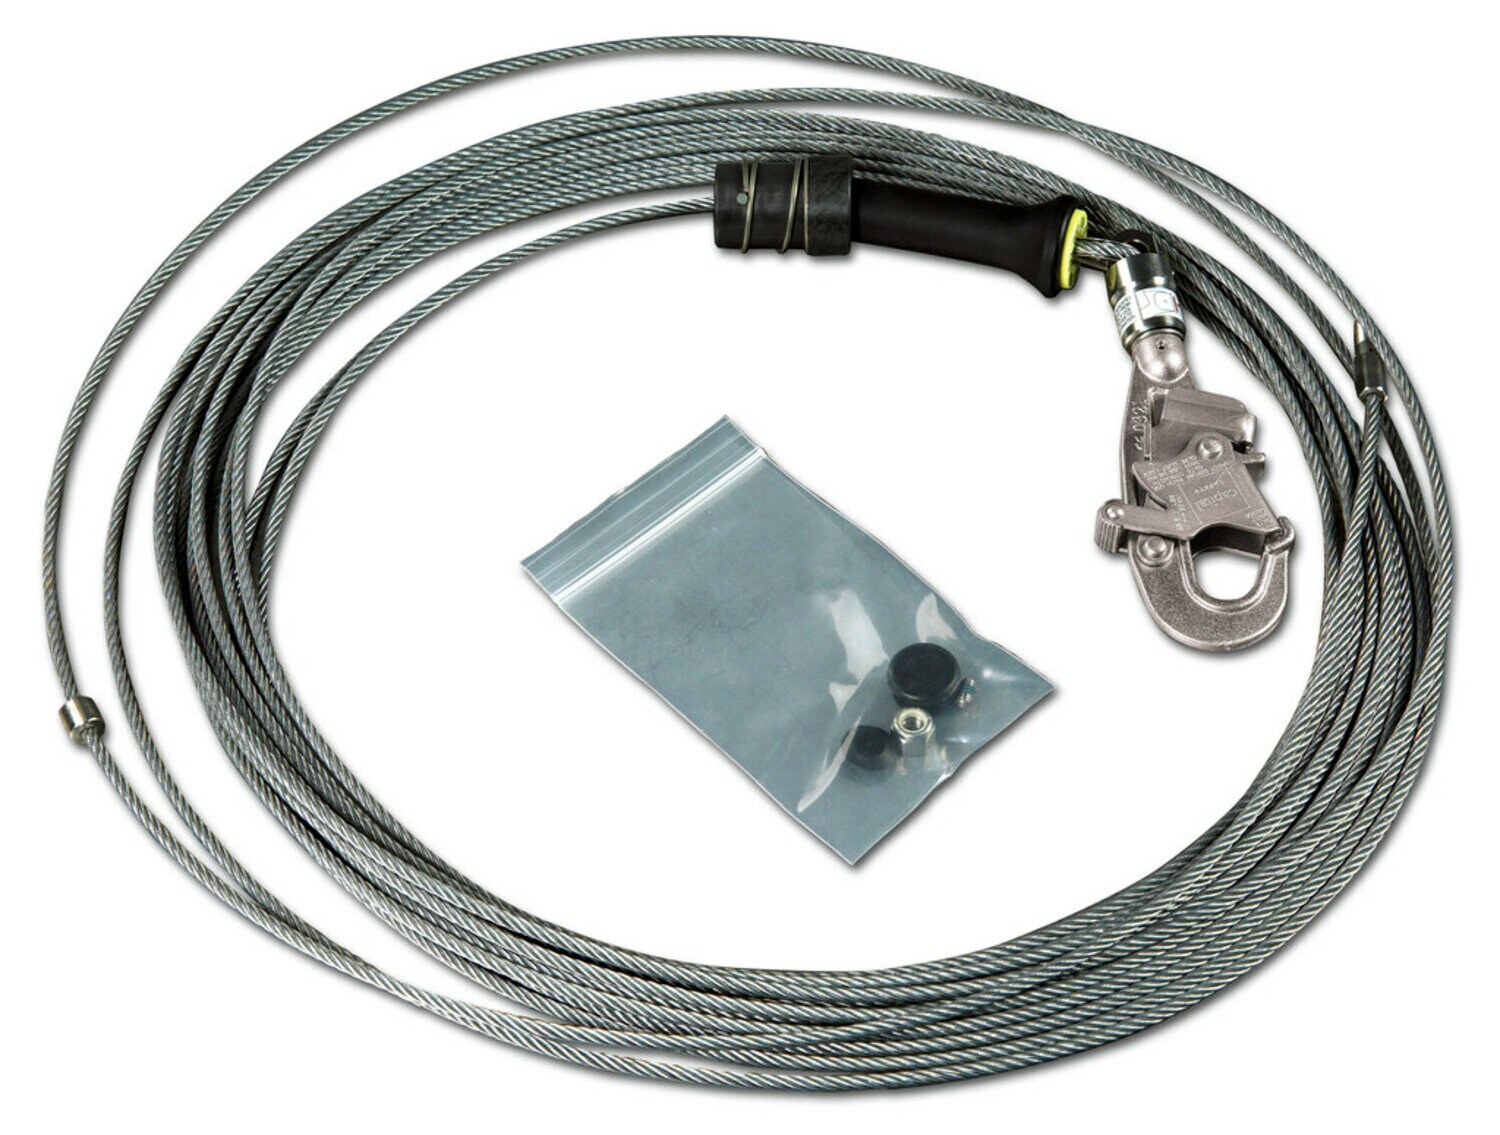 7100314297 - 3M DBI-SALA Sealed-Blok Self-Retracting Lifeline Cable Assembly
3900170, Stainless Steel, 175 ft